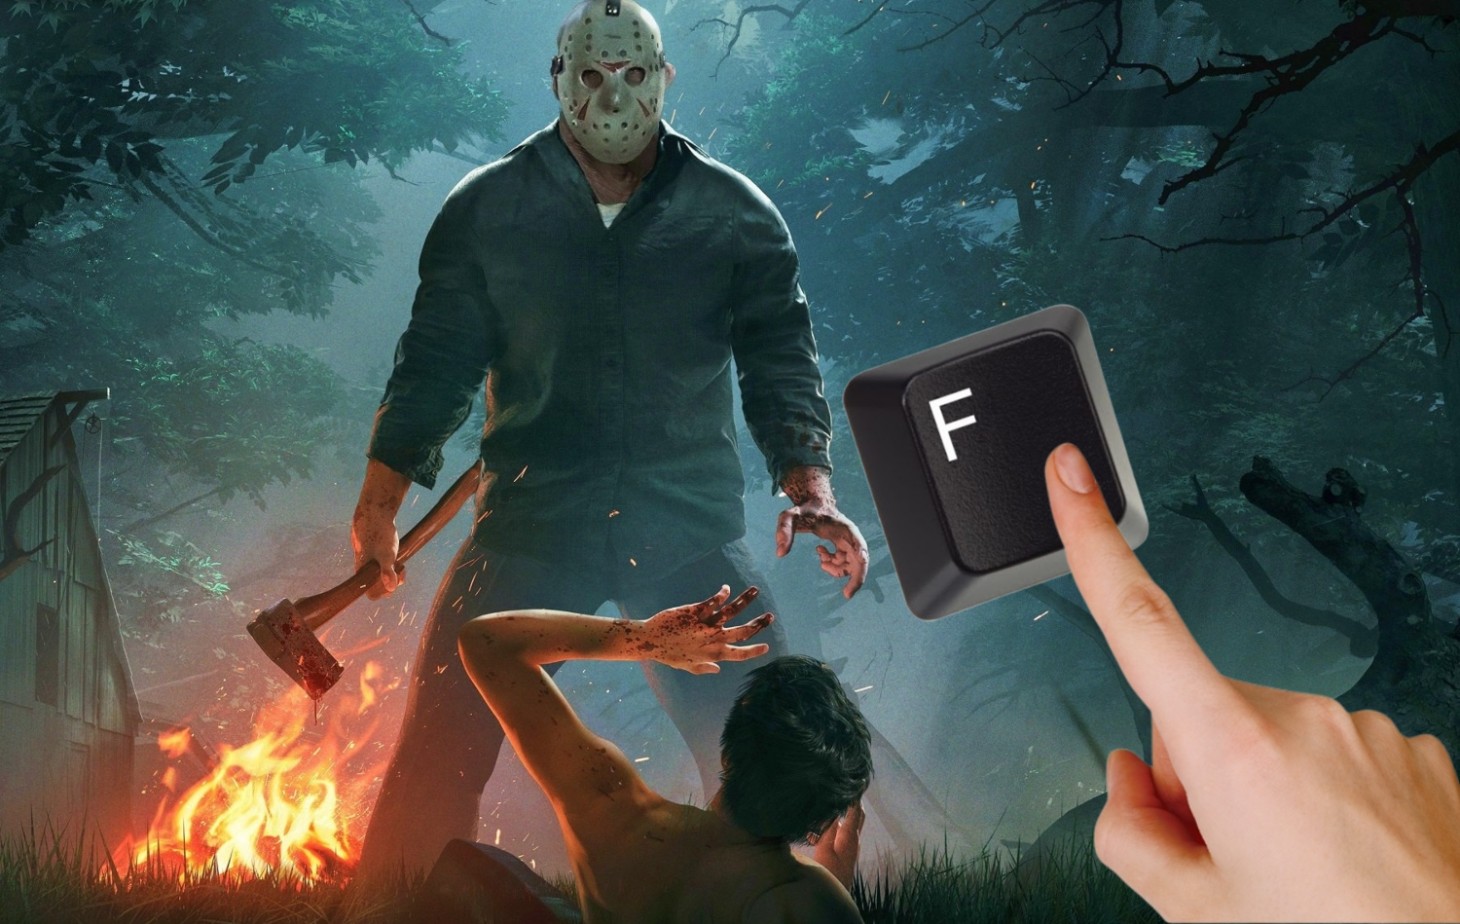 Friday the 13th The Game Multiplayer With All DLC Free Download - IPC Games